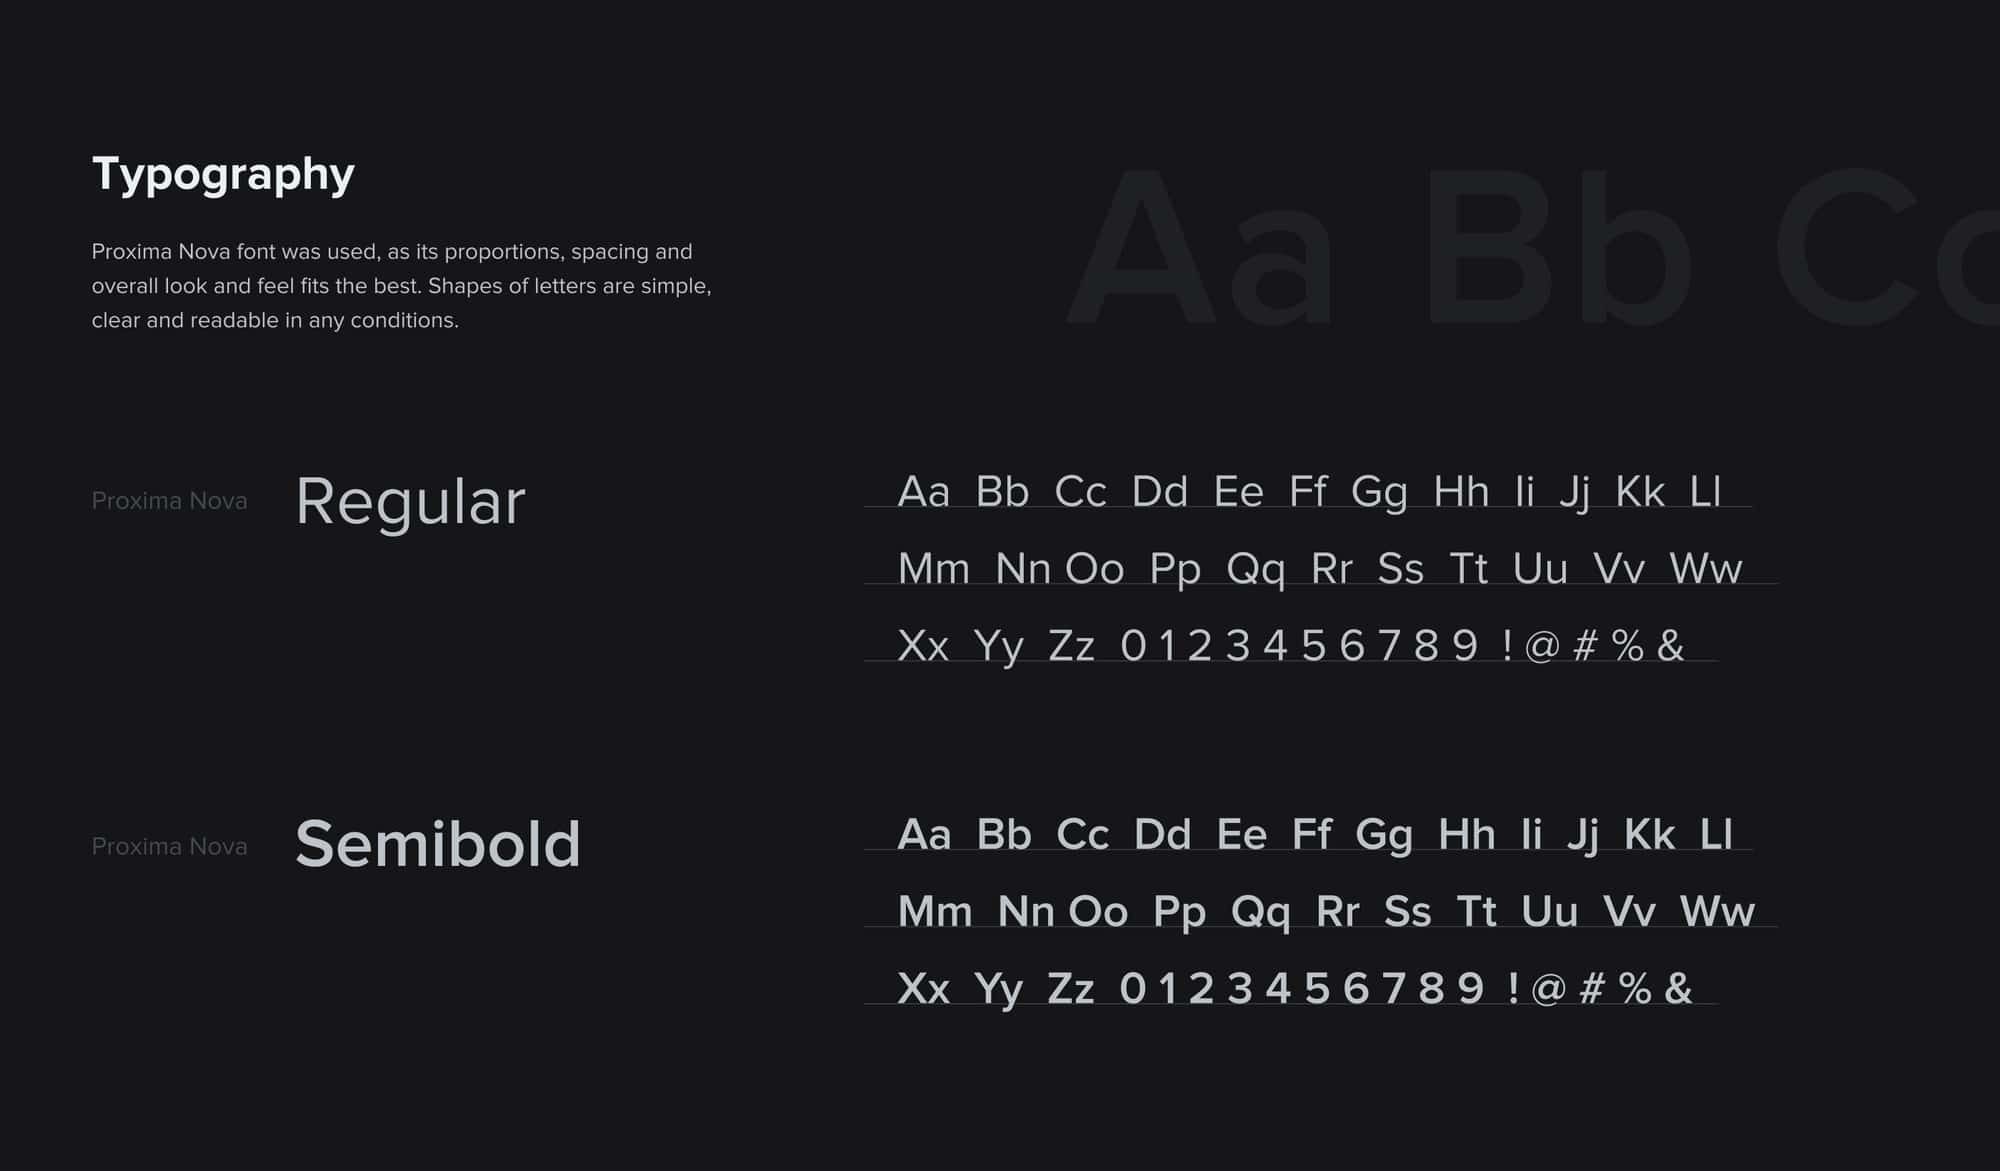 Typography used for Netifi, featuring the Proxima Nova font in two styles Regular and Semibold